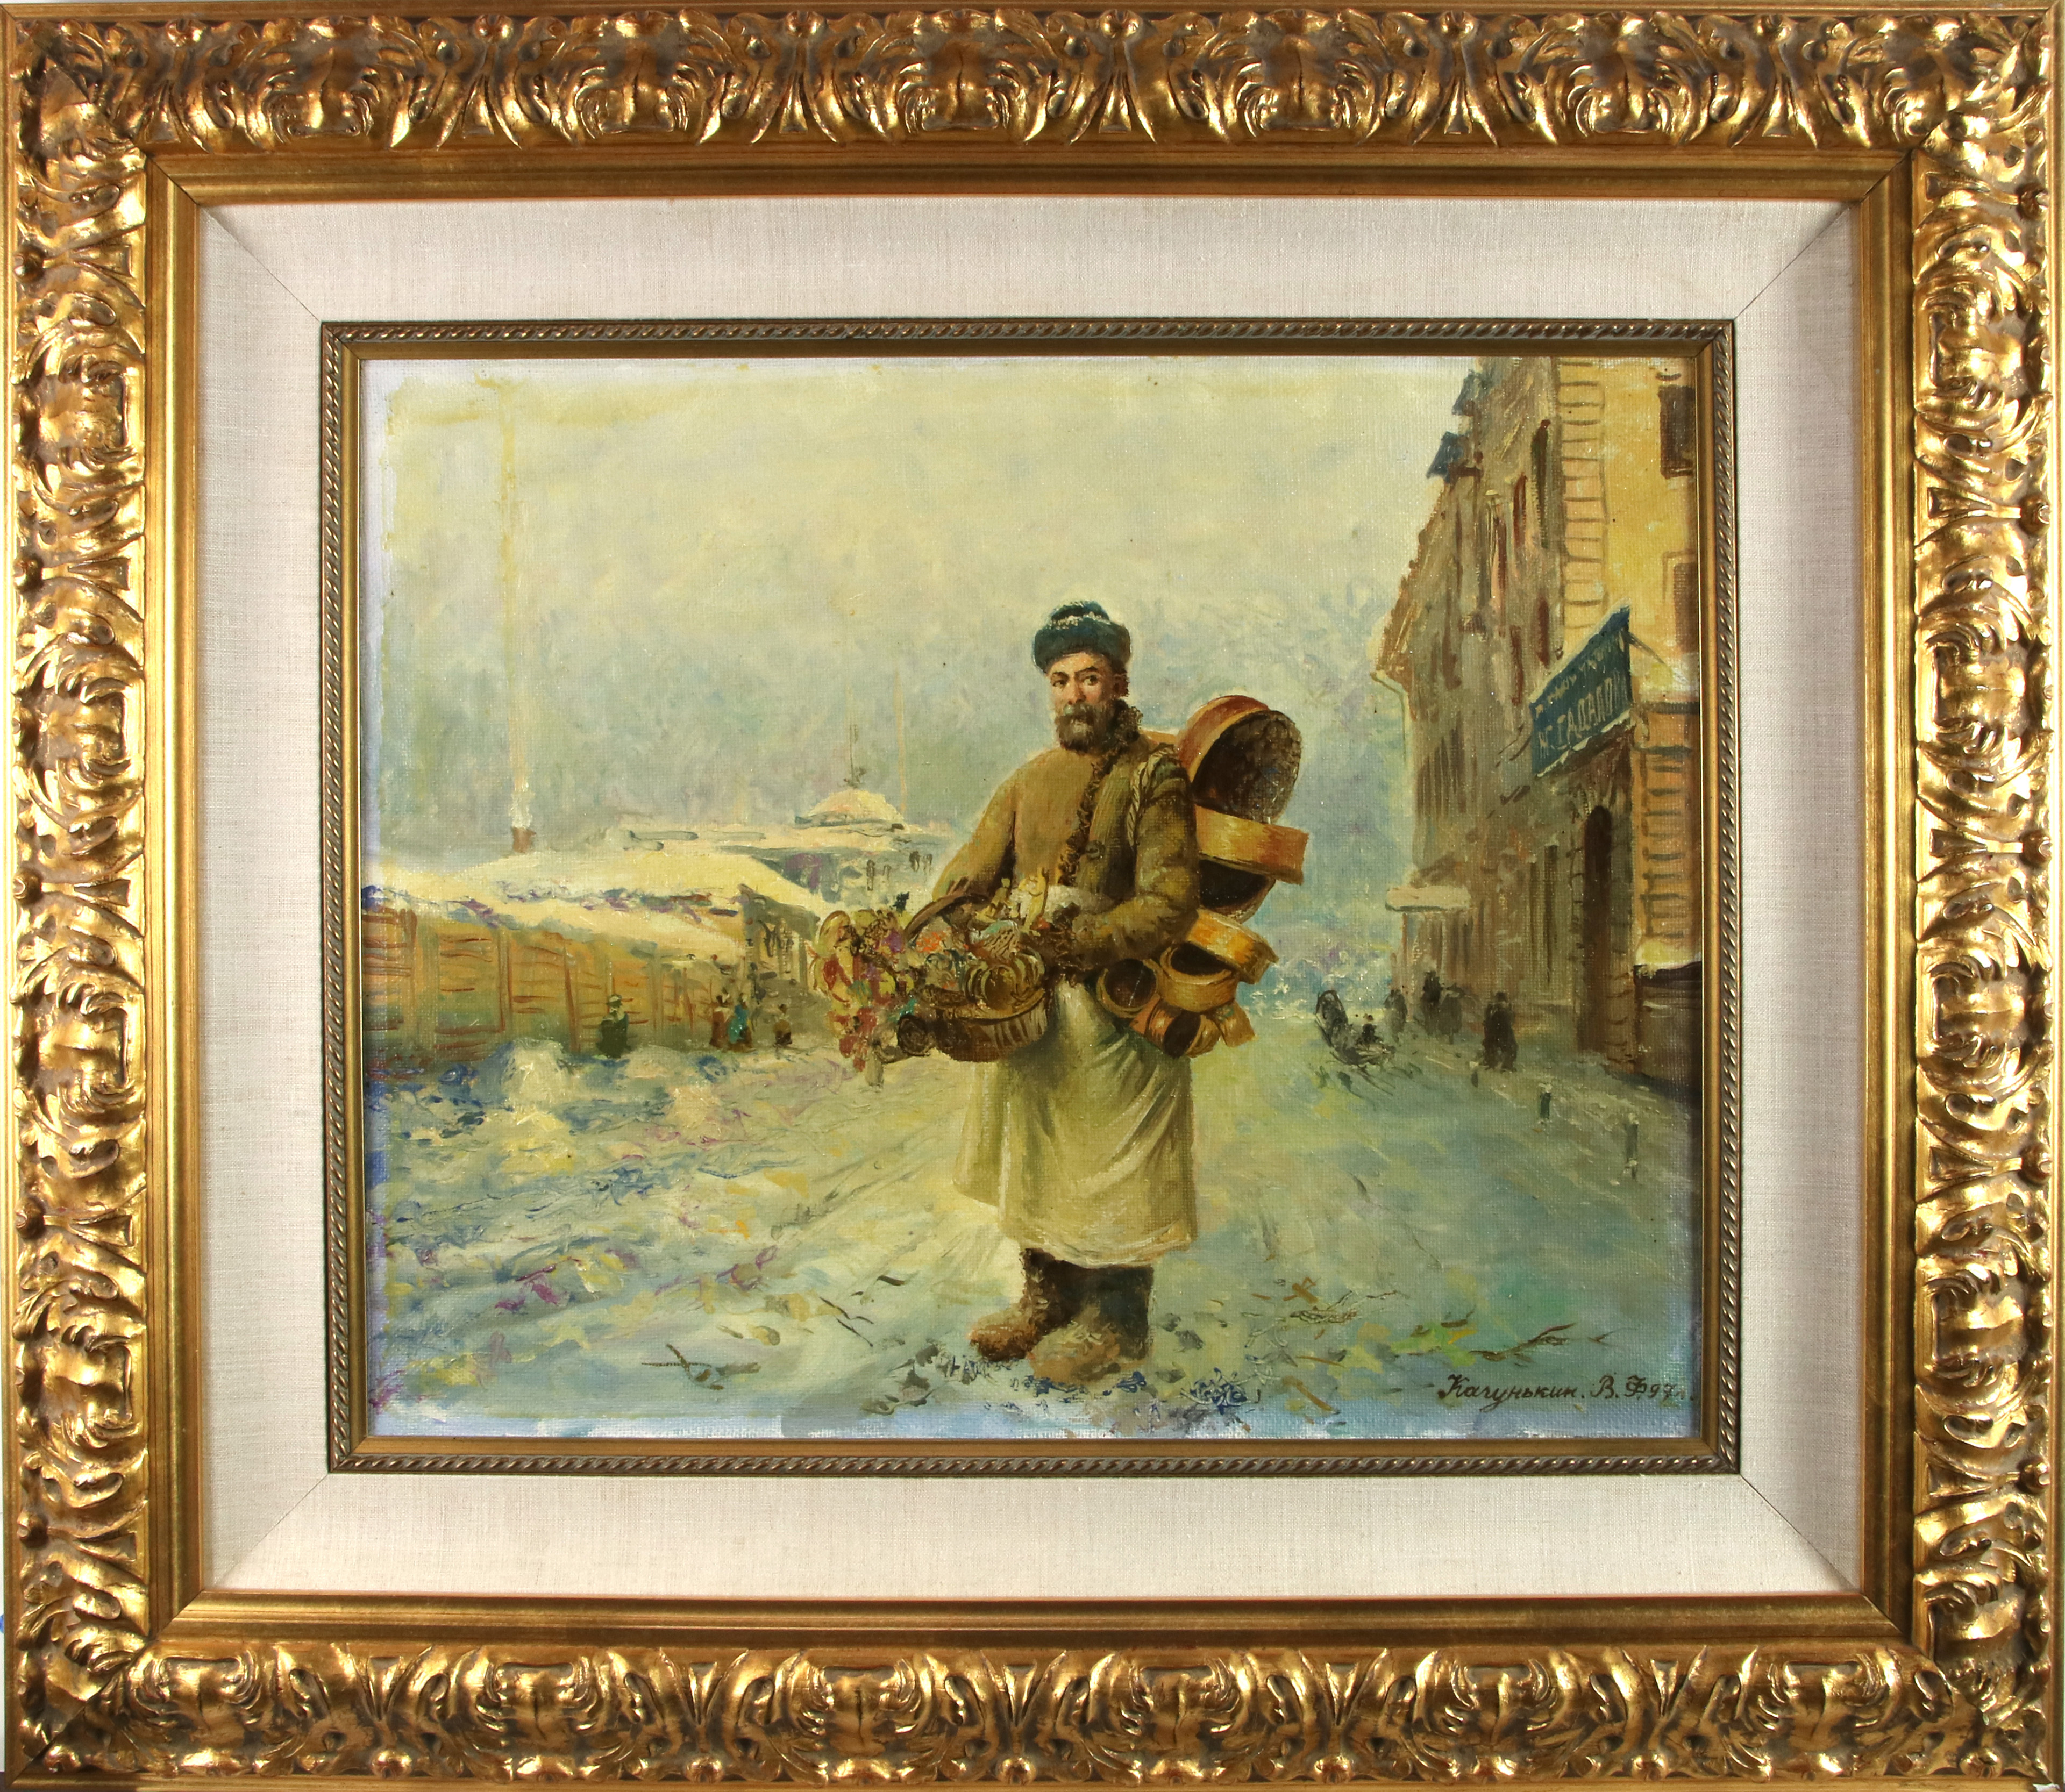 PAINTING MERCHANT IN THE SNOW 3a4e23